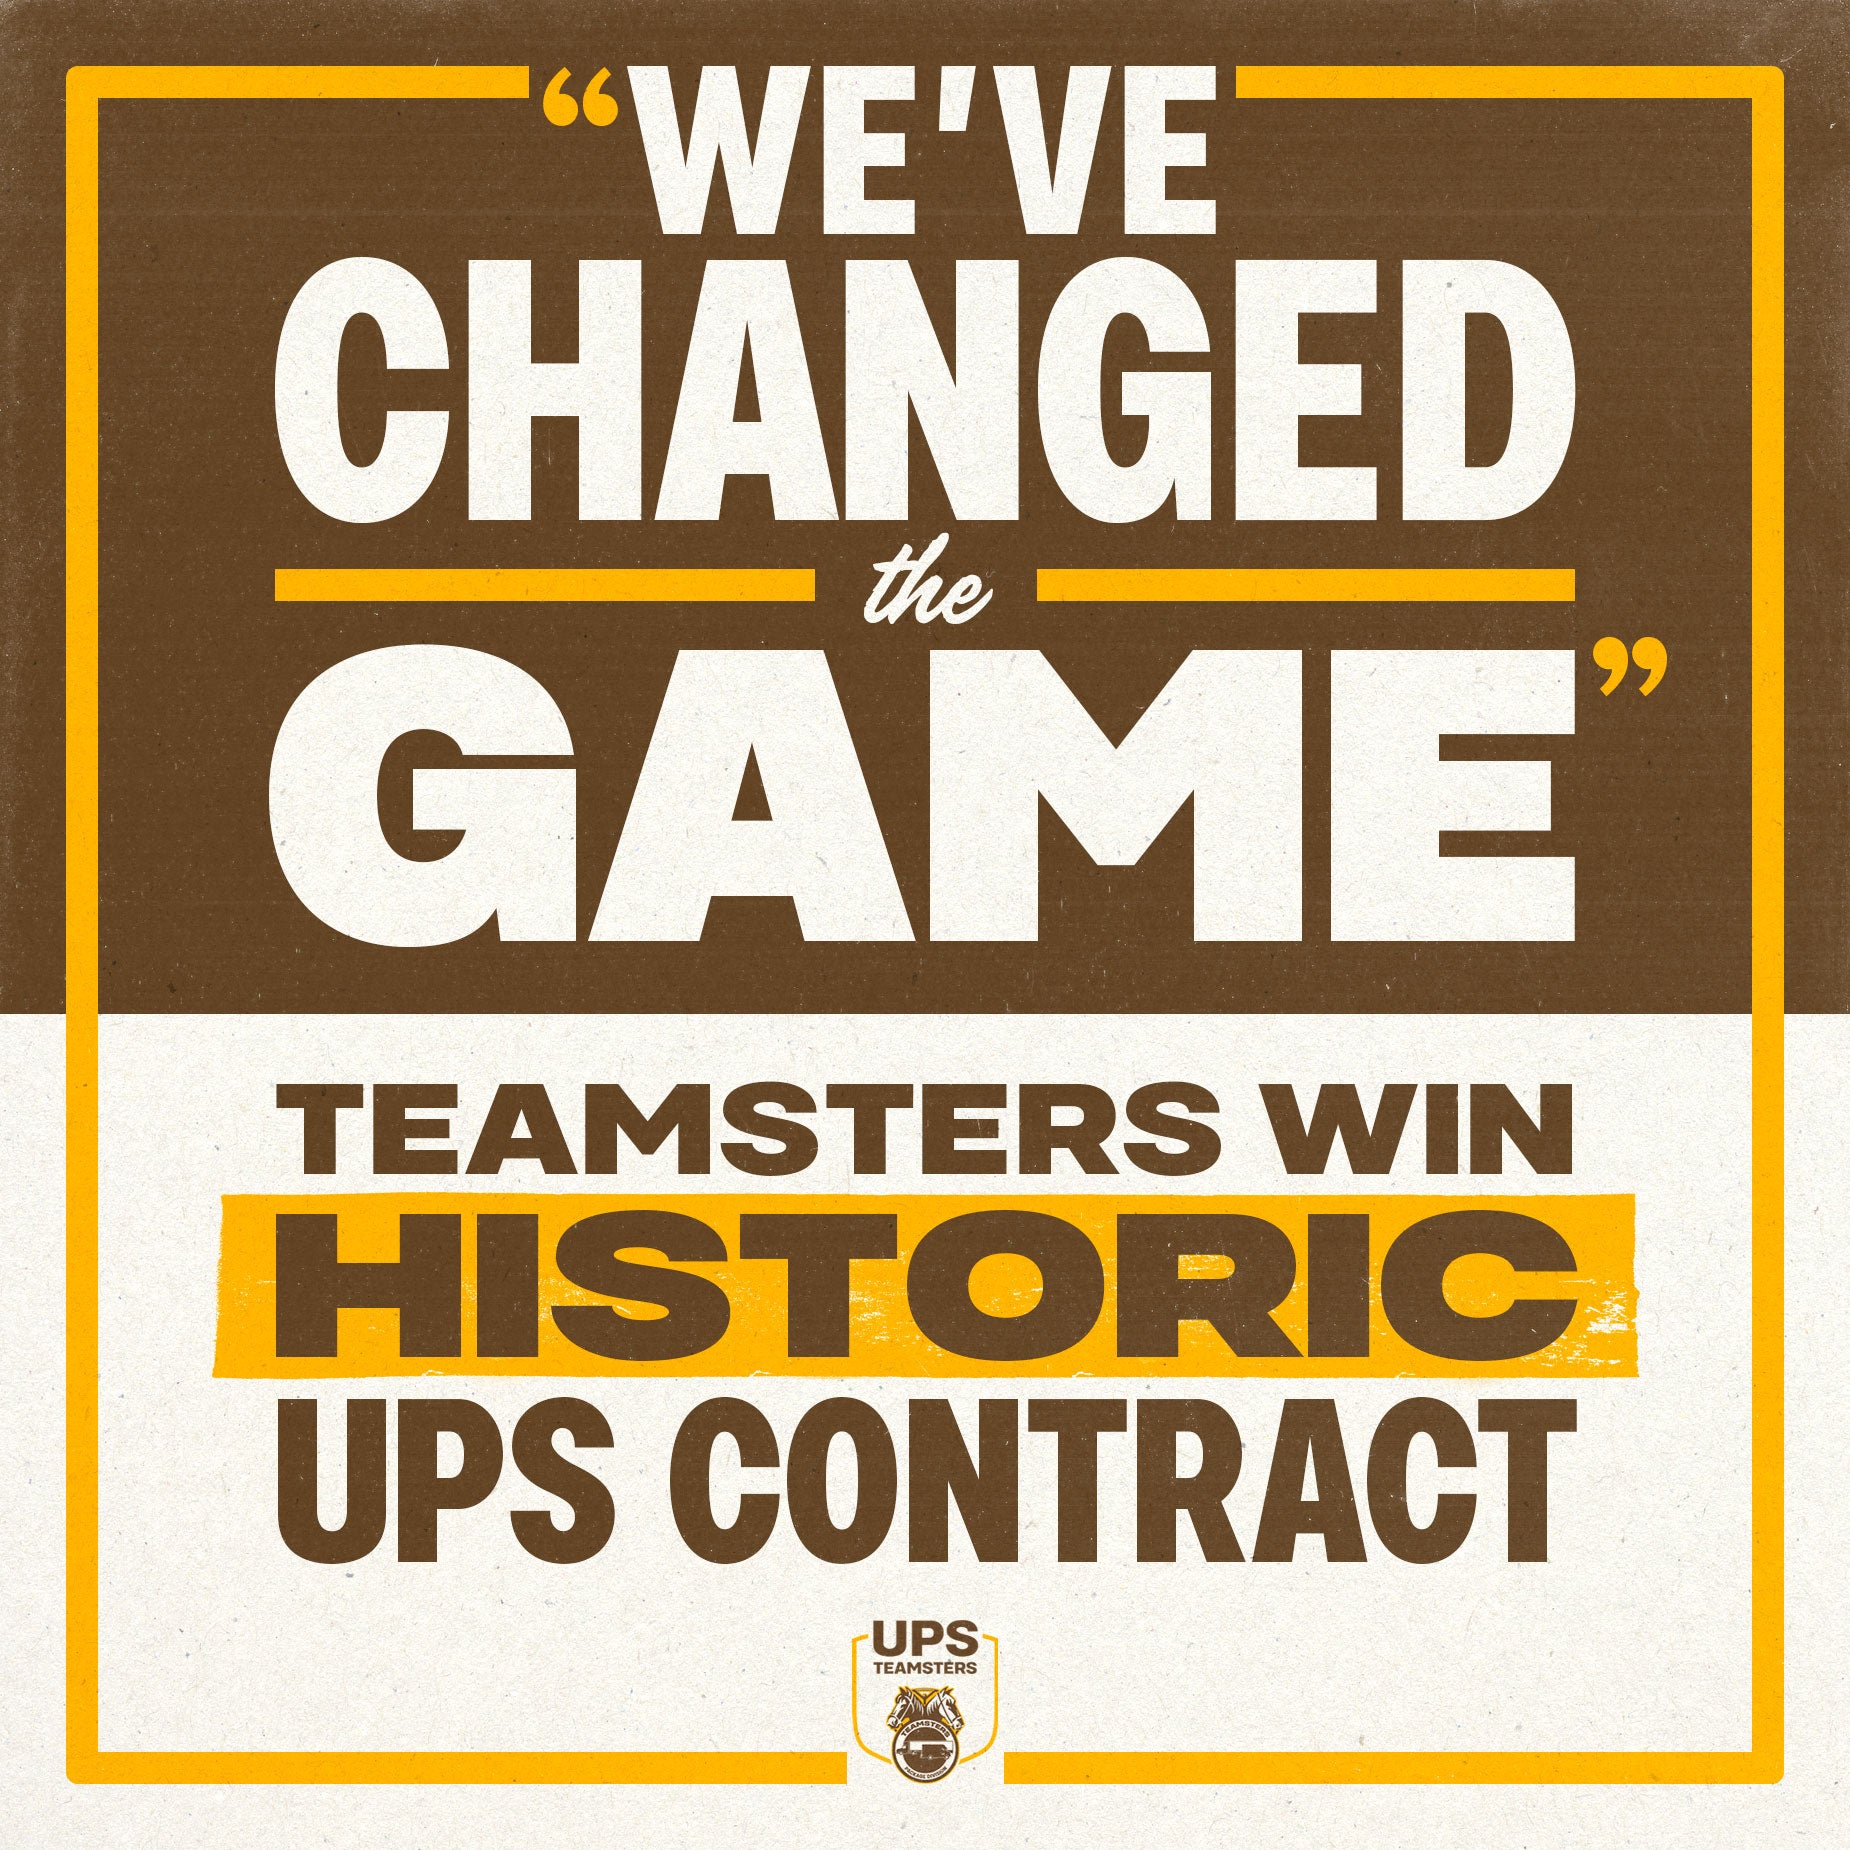 ‘We’ve changed the game’: Teamsters win historic UPS contract